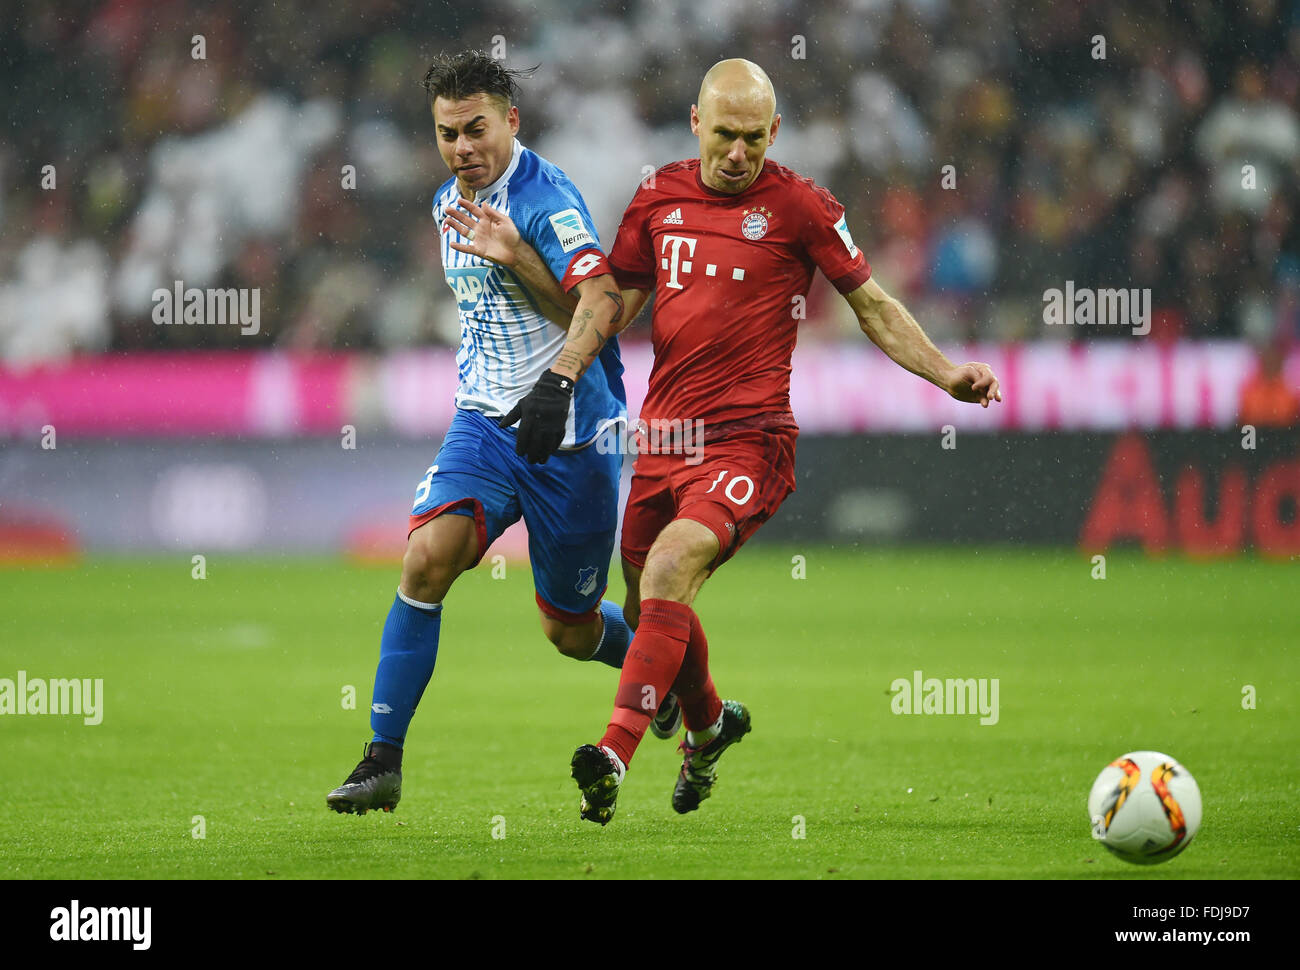 Munich, Germany. 31st Jan, 2016. Munich's Arjen Robben (R) vies for the ball with Hoffenheim's Eduardo Jésus Vargas during the German Bundesliga soccer match between Bayern Munich and 1899 Hoffenheim at the Allianz Arena in Munich, Germany, 31 January 2016. Photo: TOBIAS HASE/dpa/Alamy Live News Stock Photo